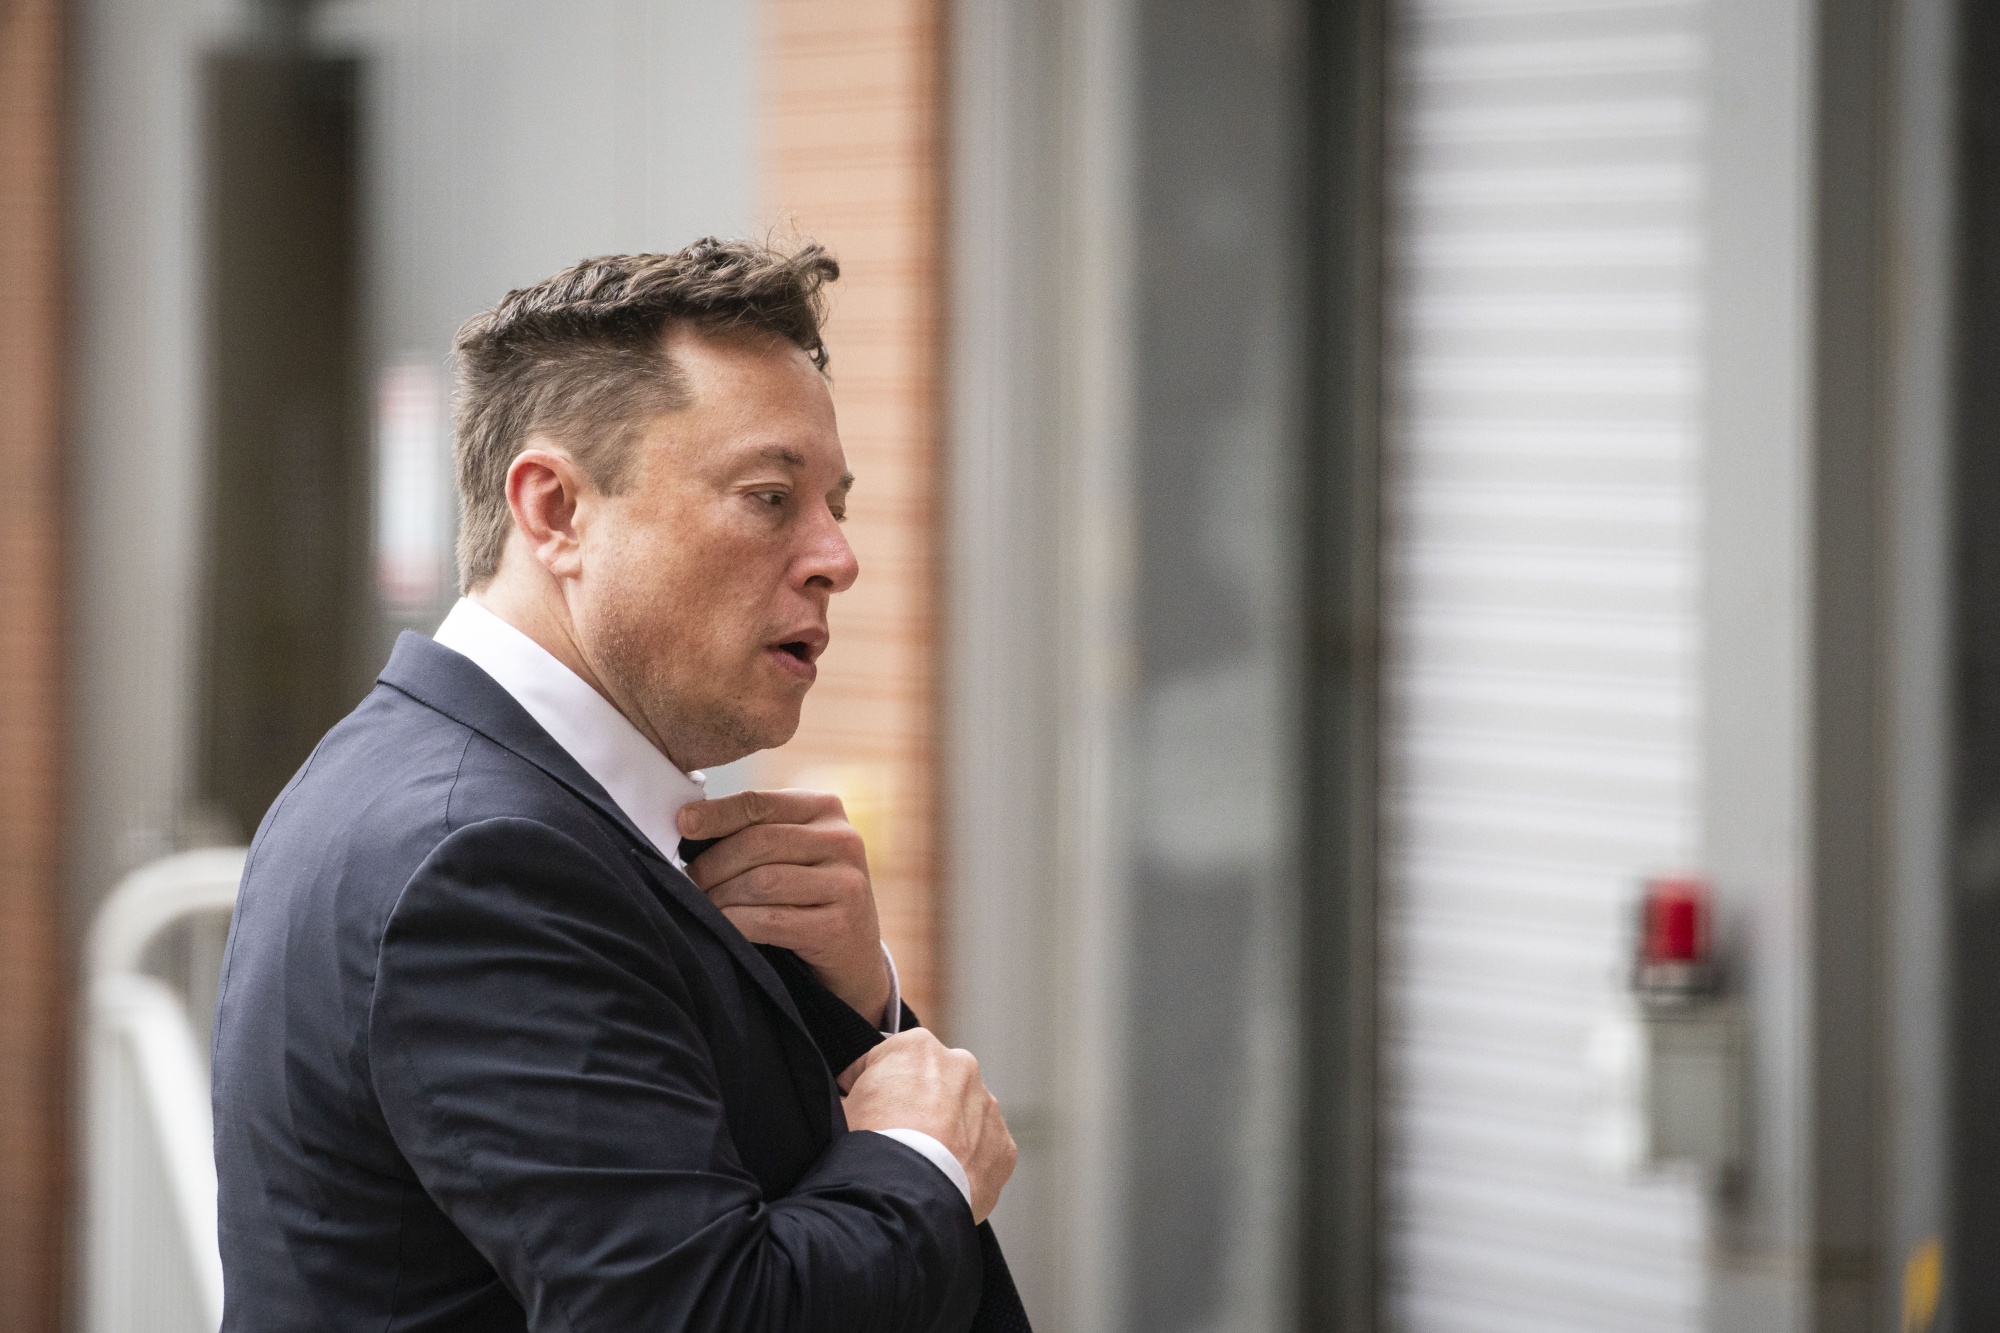 Elon Musk&nbsp;appears to have deleted a controversial tweet that made a satirical comparison between Canadian Prime Minister&nbsp;Justin Trudeau&nbsp;and Adolf Hitler.